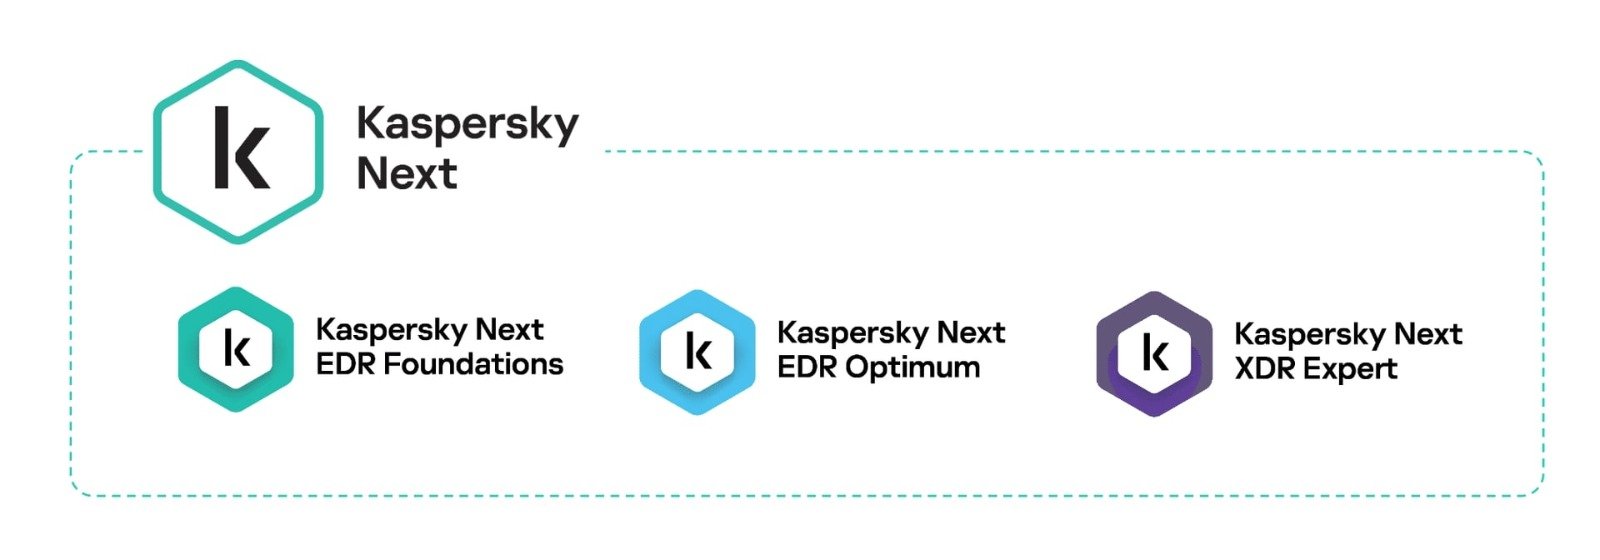 Kaspersky Next: Endpoint Protection Meets EDR & XDR Agility